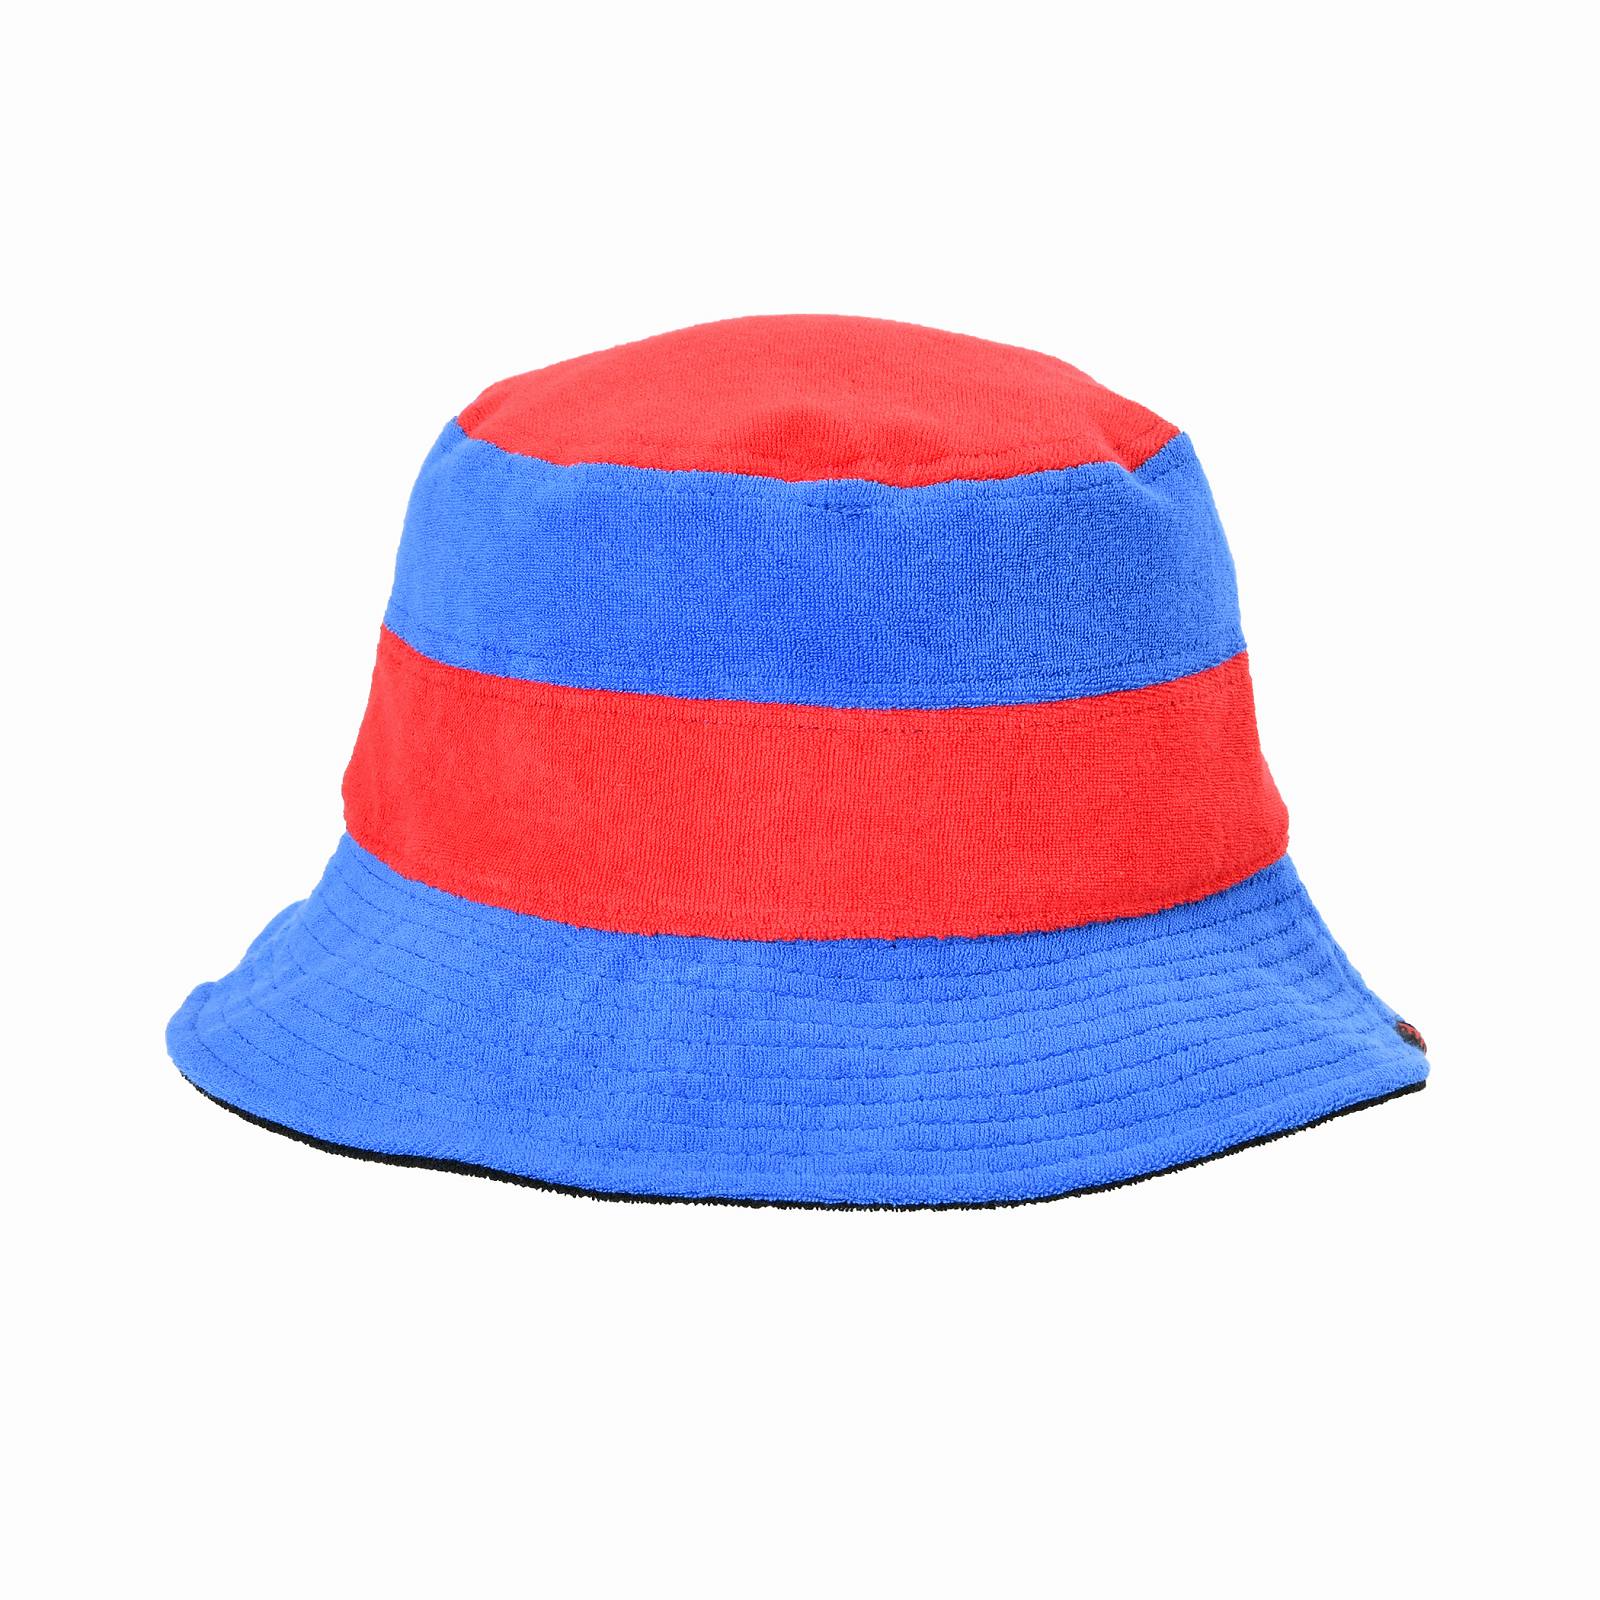 Reversible hat, made to order in FC Tokyo club colors